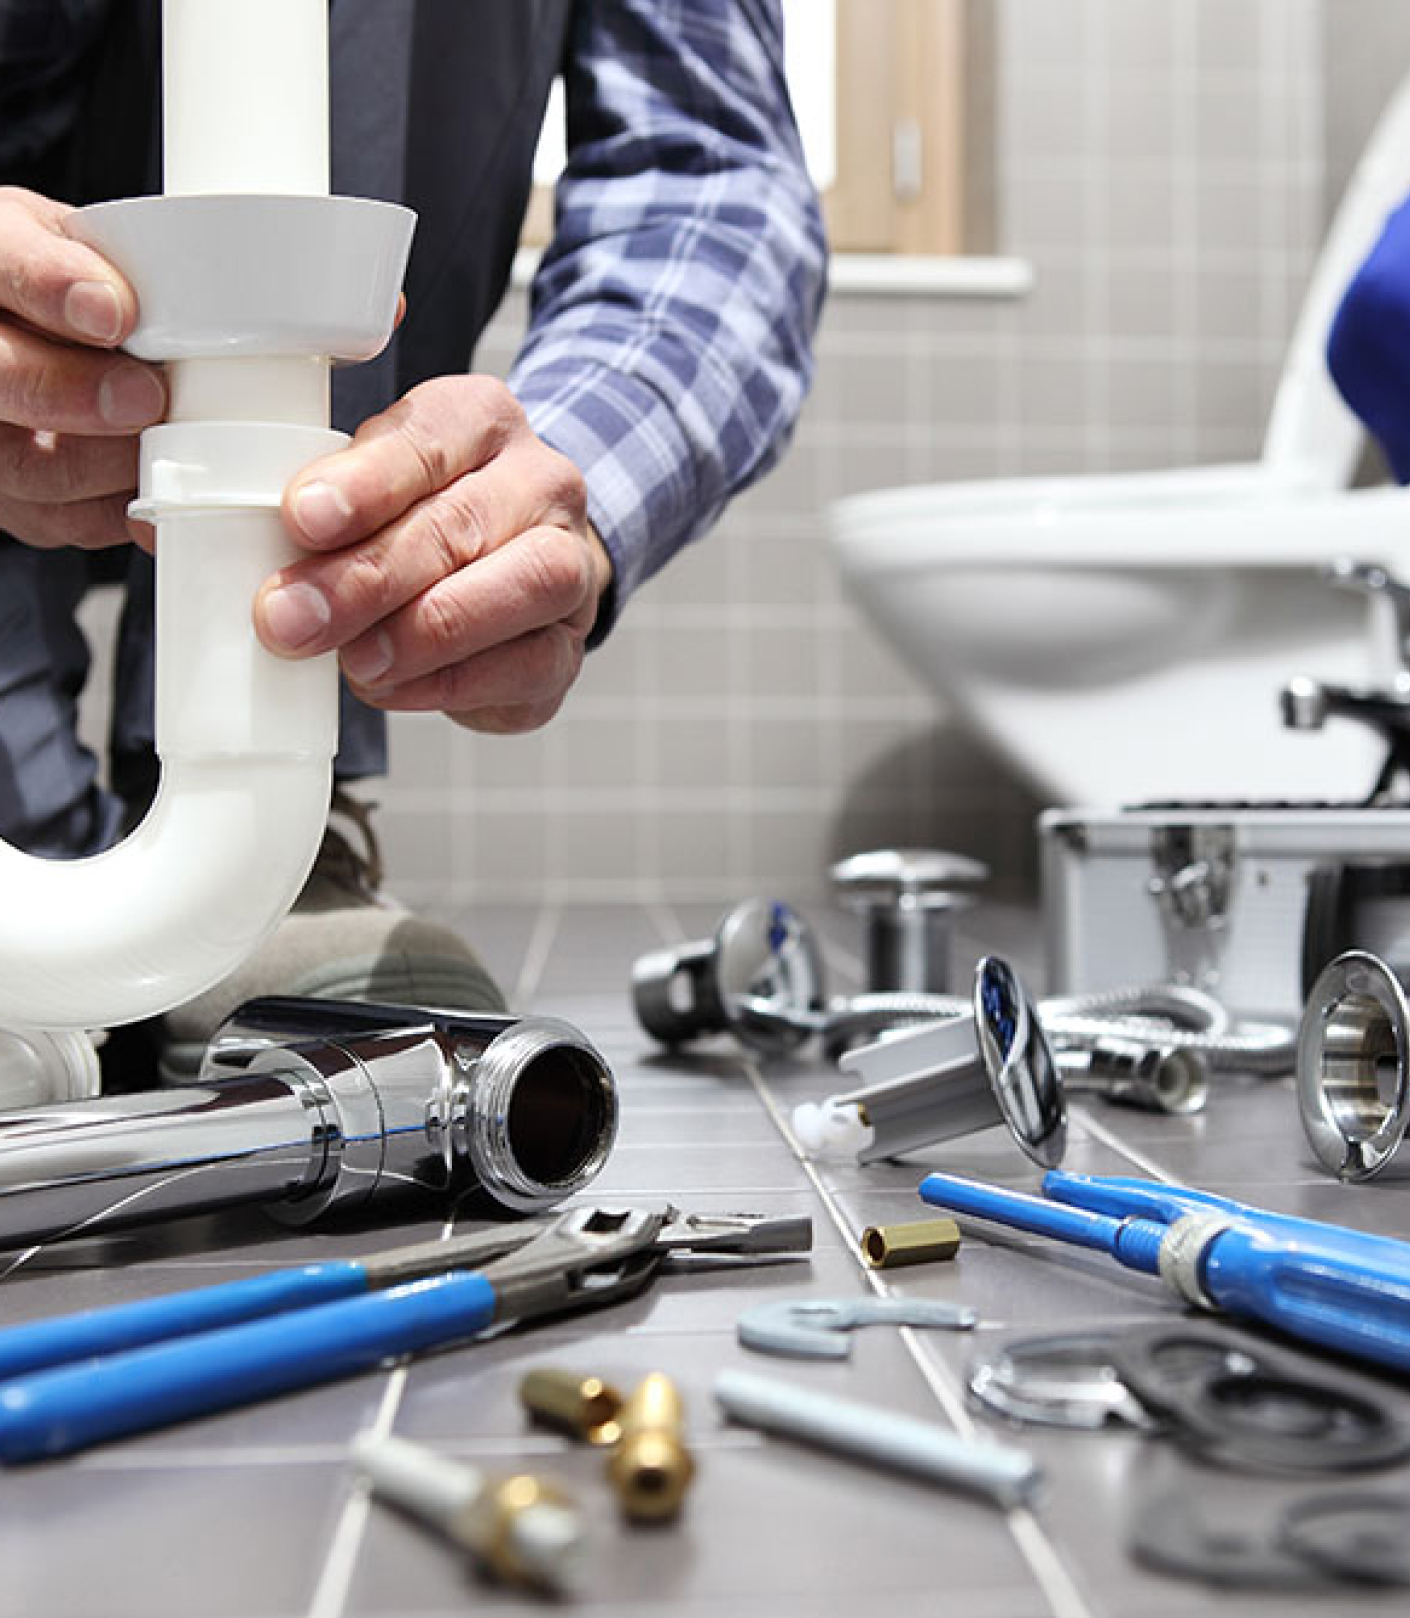 Ada Mechanical plumbers in Woodford Green. Serving the local area including Loughton, Epping, Buckhurst Hill, Wanstead, South Woodford and Ilford.